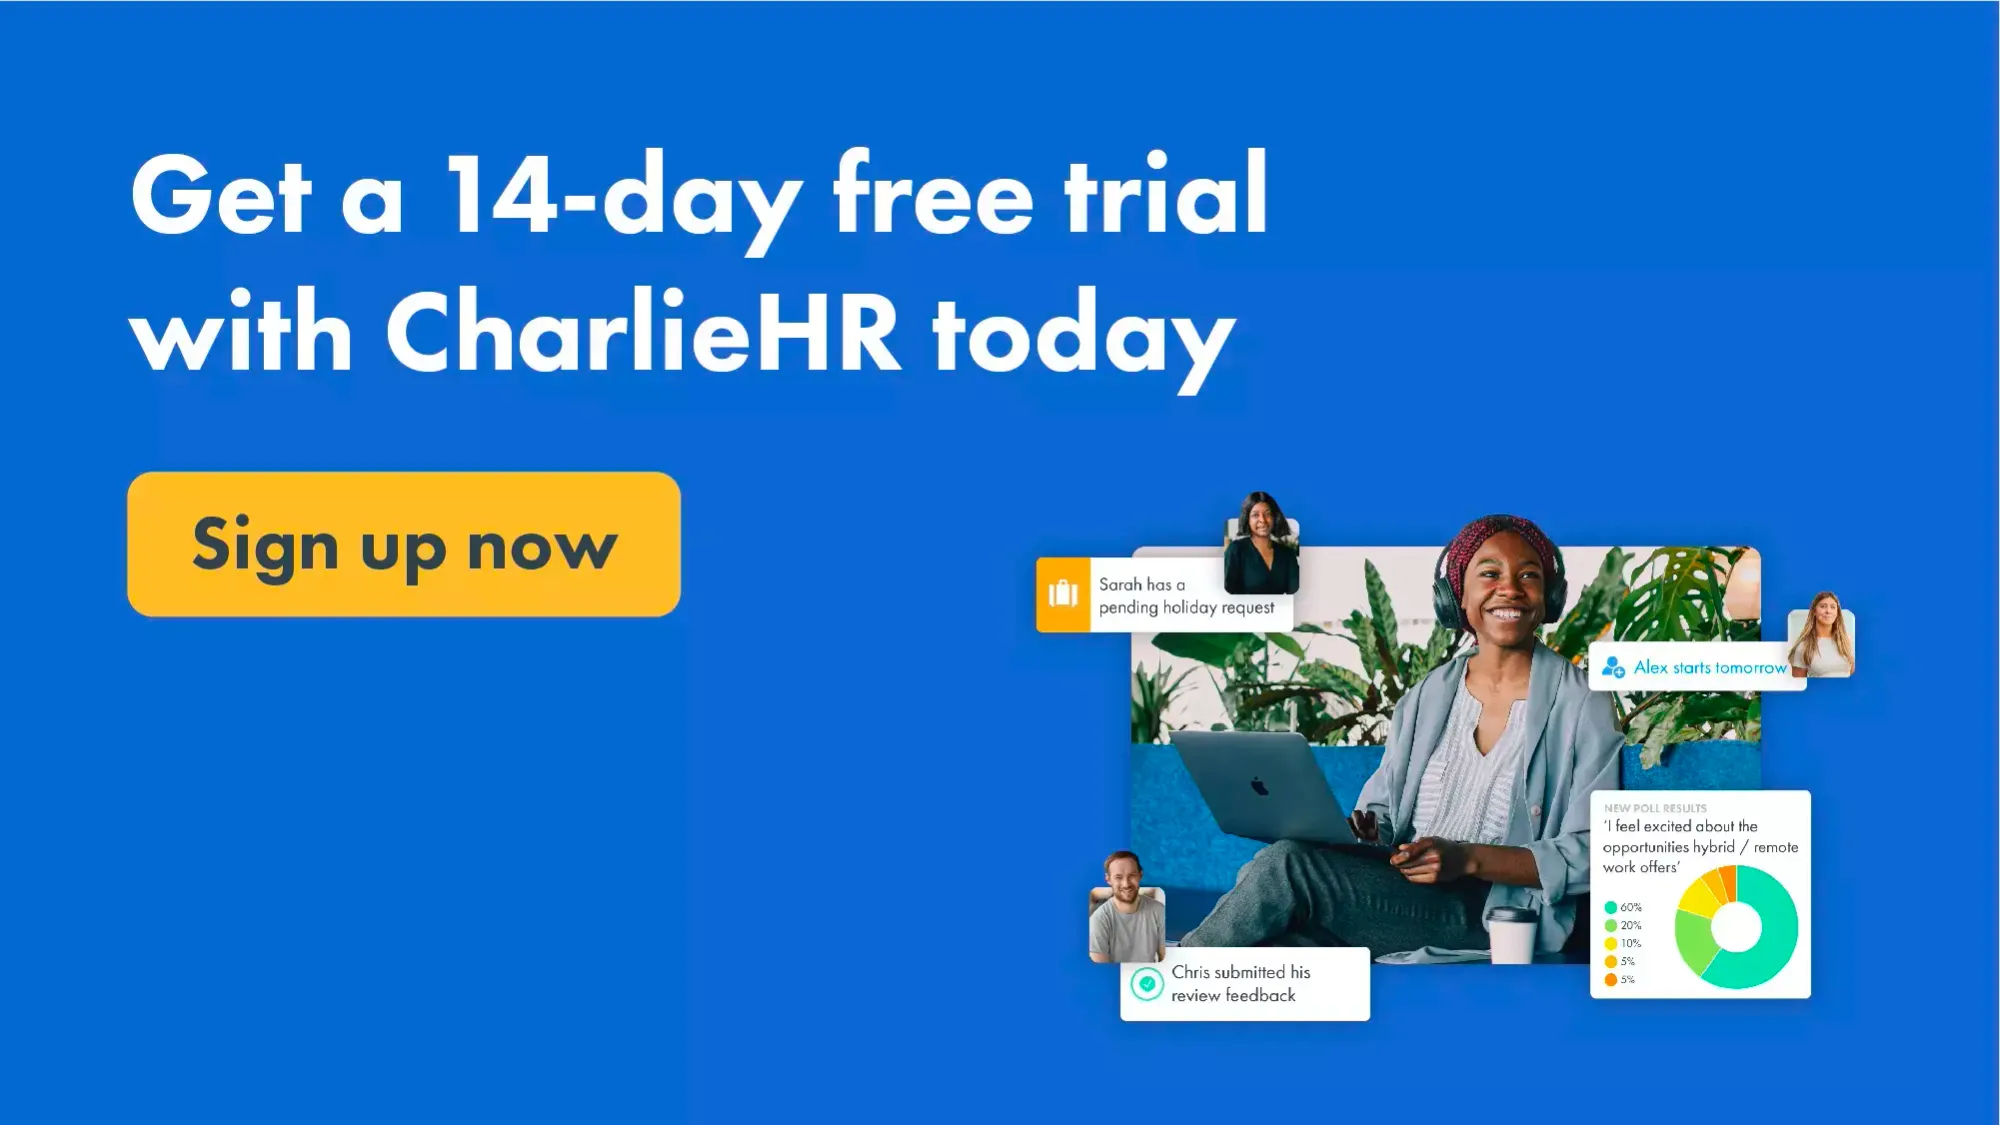 Start a free trial of CharlieHR by clicking here